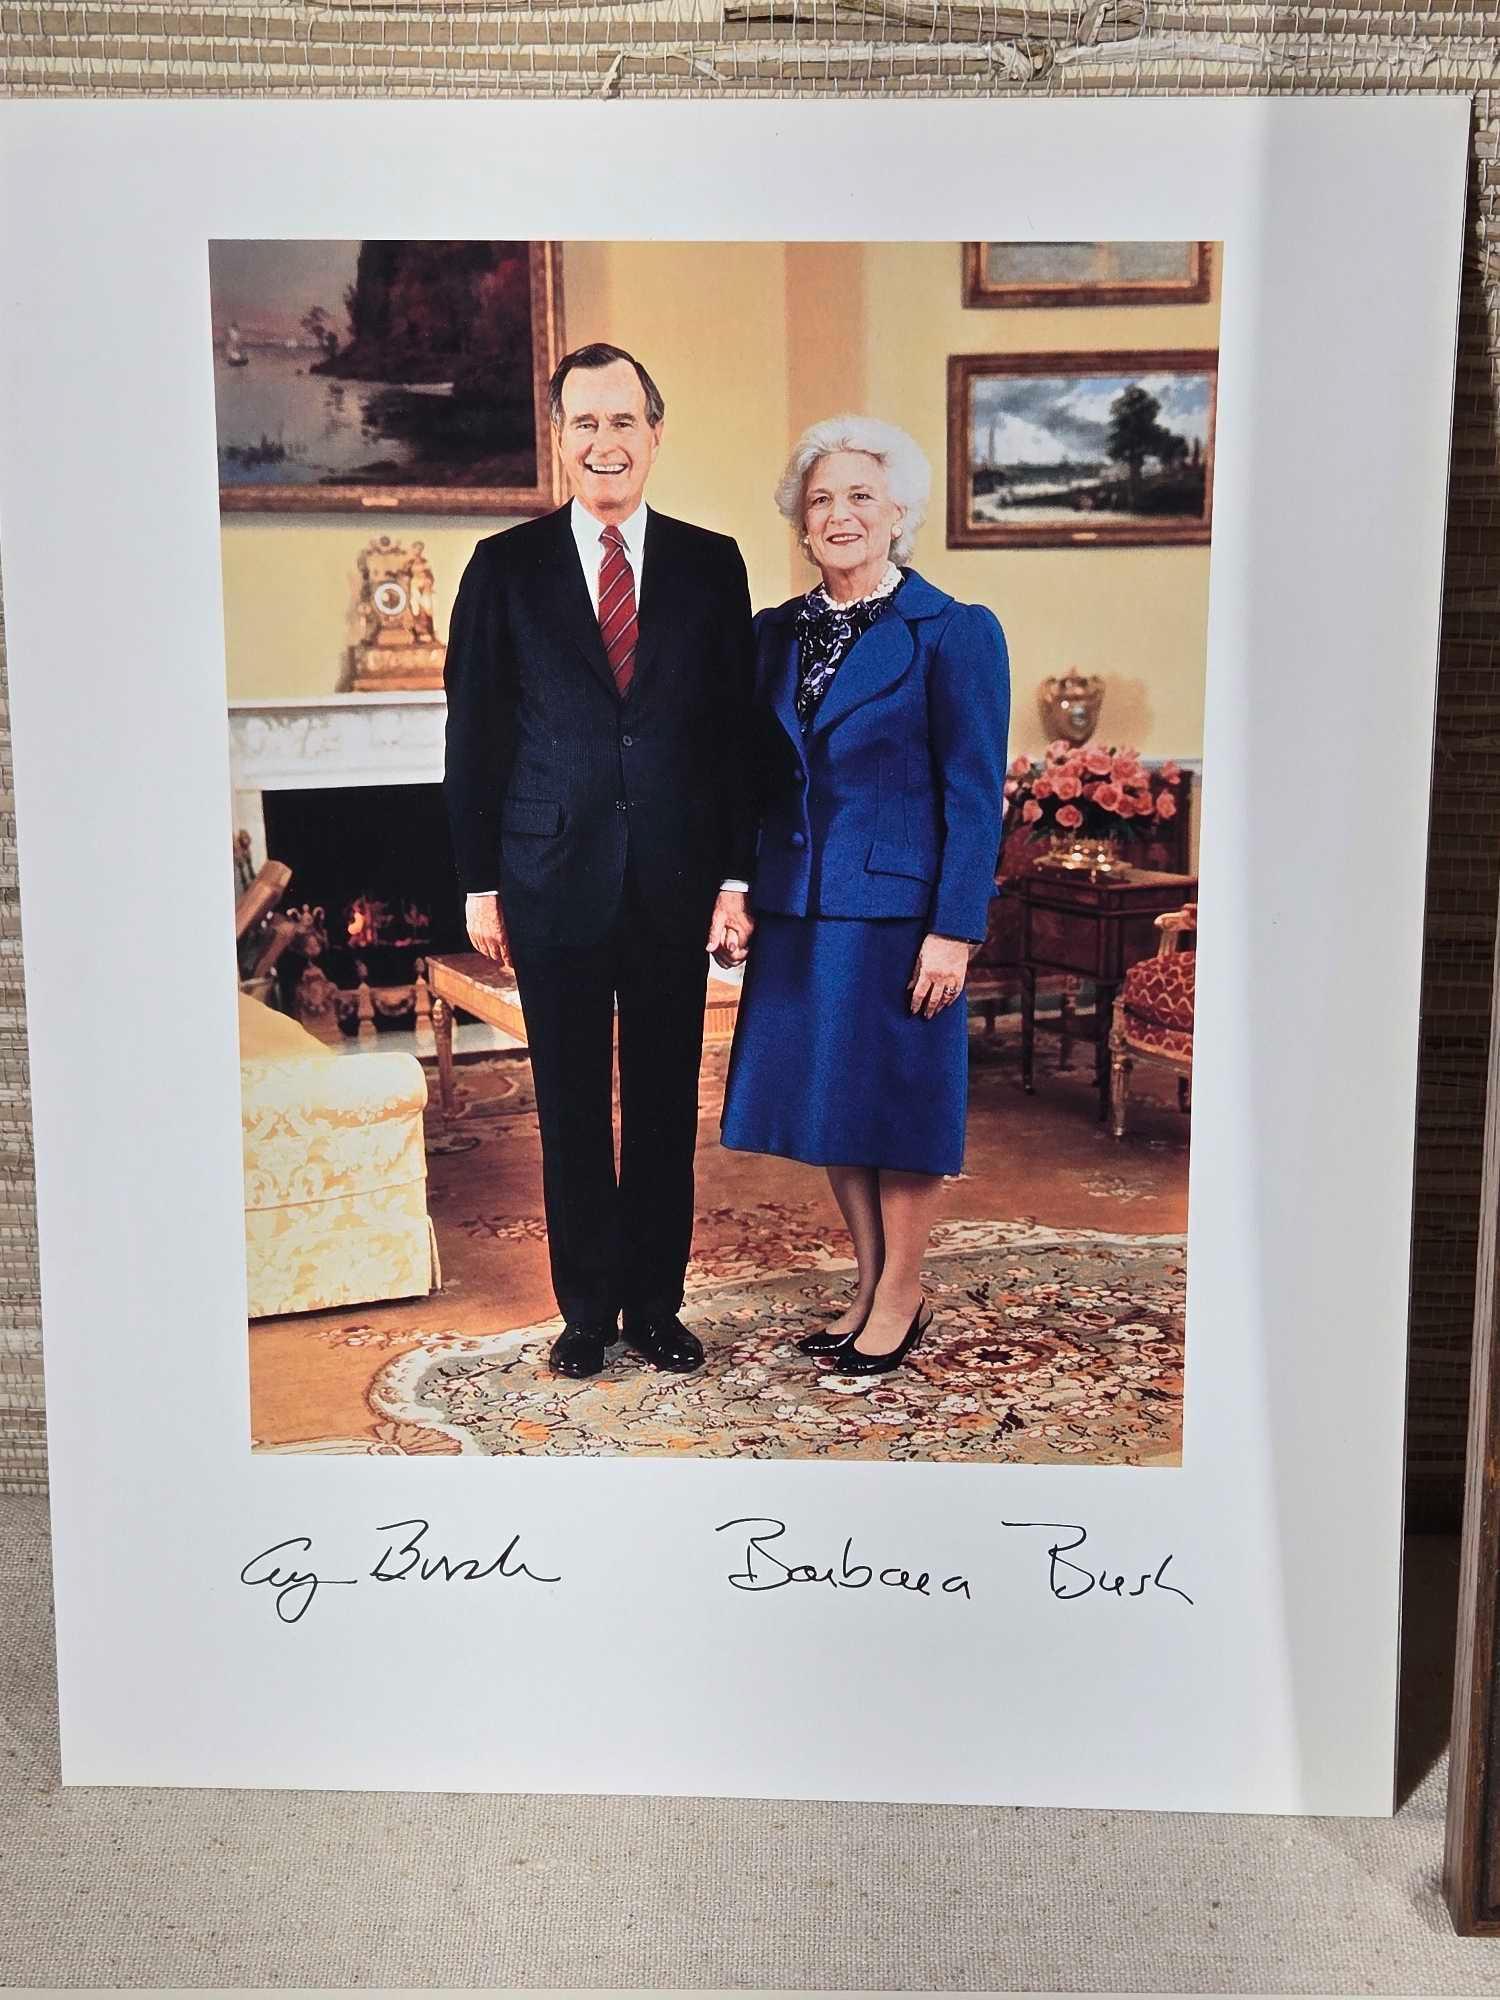 Vintage Campaign Signs, Signed George Bush Photos, & Black and White Photos of Pulaski Assoc.